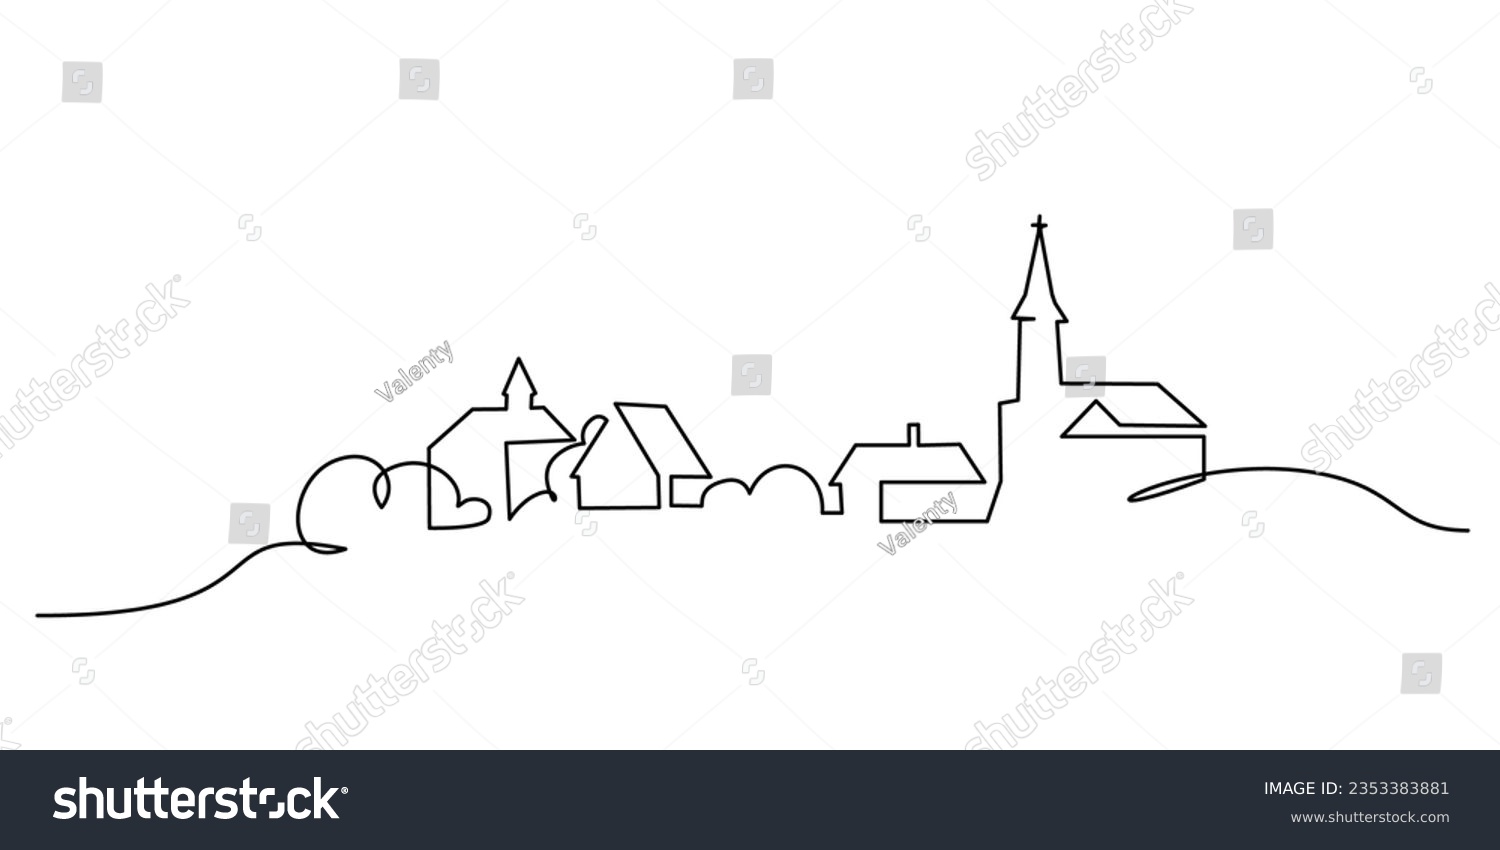 SVG of Village with church. Continuous one line art drawing style. Landscape of small country. Black linear sketch isolated on white background. Vector illustration svg